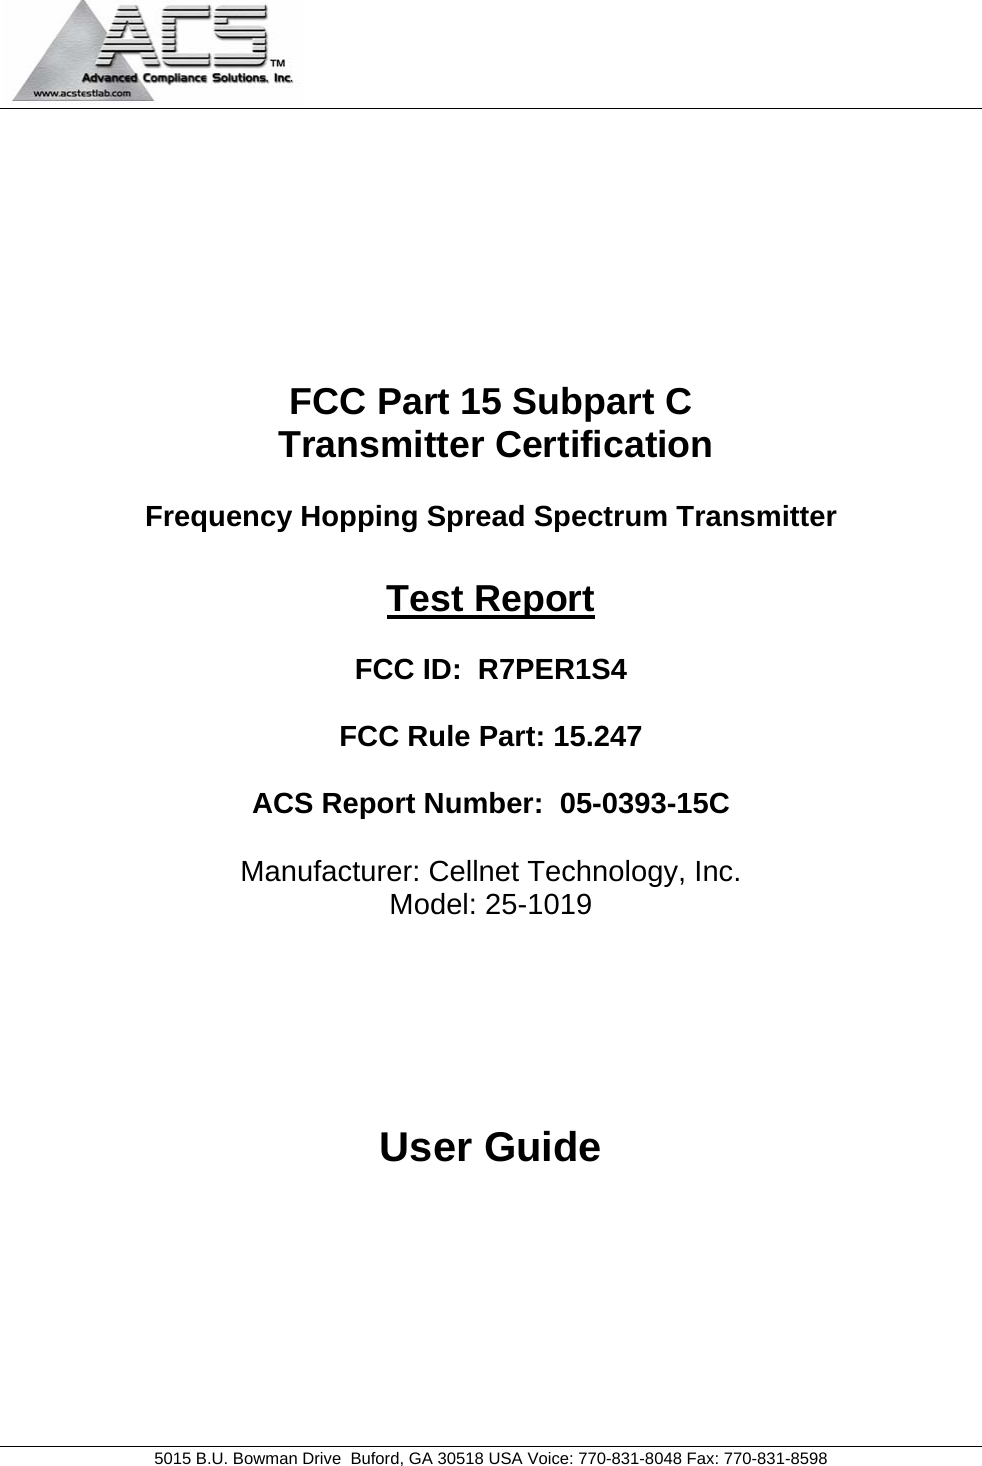   5015 B.U. Bowman Drive  Buford, GA 30518 USA Voice: 770-831-8048 Fax: 770-831-8598   FCC Part 15 Subpart C  Transmitter Certification  Frequency Hopping Spread Spectrum Transmitter  Test Report  FCC ID:  R7PER1S4  FCC Rule Part: 15.247  ACS Report Number:  05-0393-15C   Manufacturer: Cellnet Technology, Inc. Model: 25-1019       User Guide 